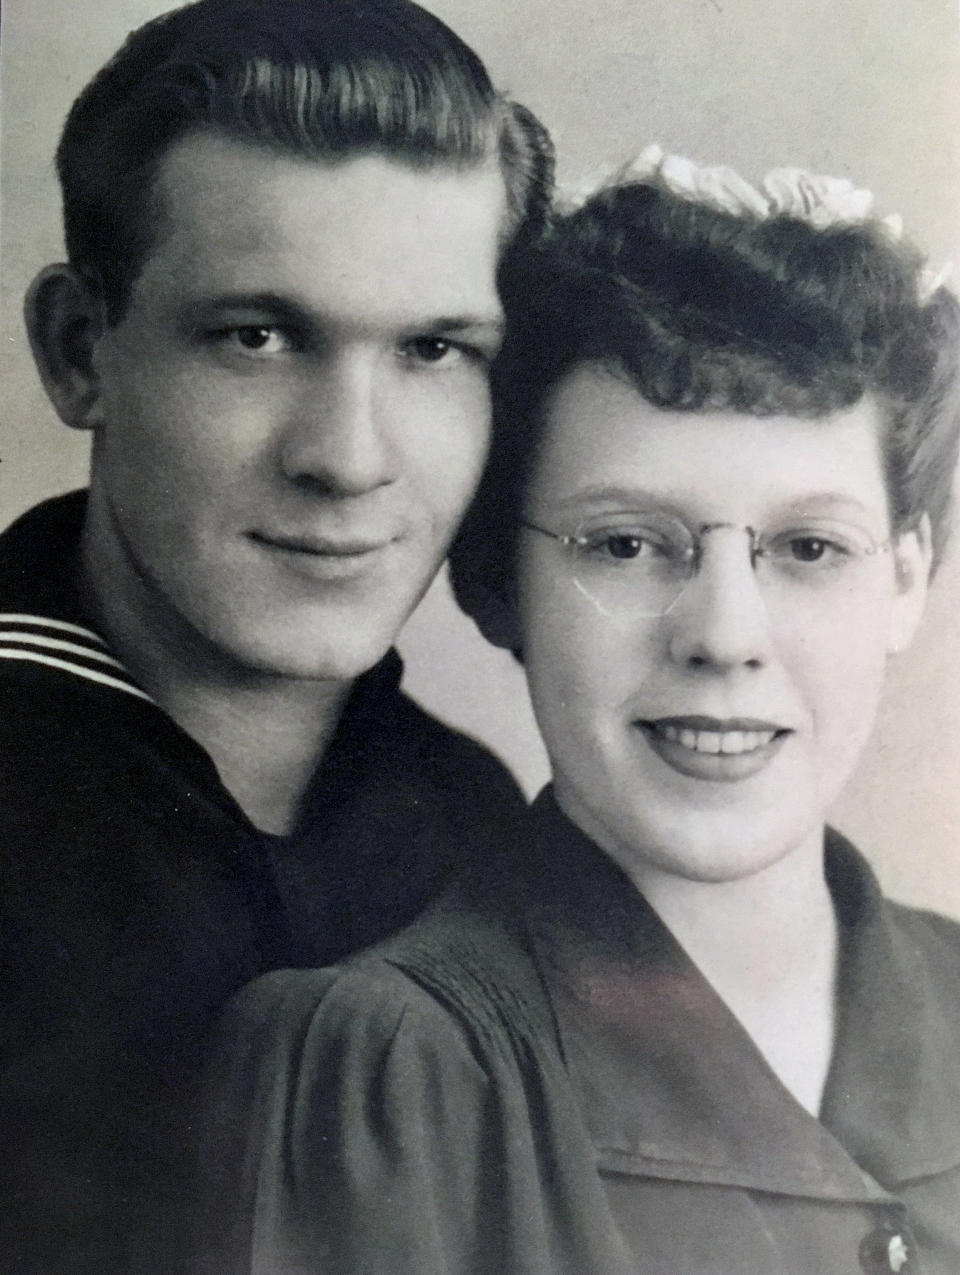 This Jan. 21, 1944, photo, provided by Debbie Hodges shows Julian and Jacqueline Hodges on their wedding day in Lewiston, Mont. Julian Hodges, now of Johnson City, Tenn., is believed to be one of the last two men alive of the 4,600 servicemen who between 1937 and 1942 served aboard the USS Yorktown, an aircraft carrier sunk by a Japanese submarine following the June 1942 Battle of Midway. (Courtesy of Debbie Hodges via AP)